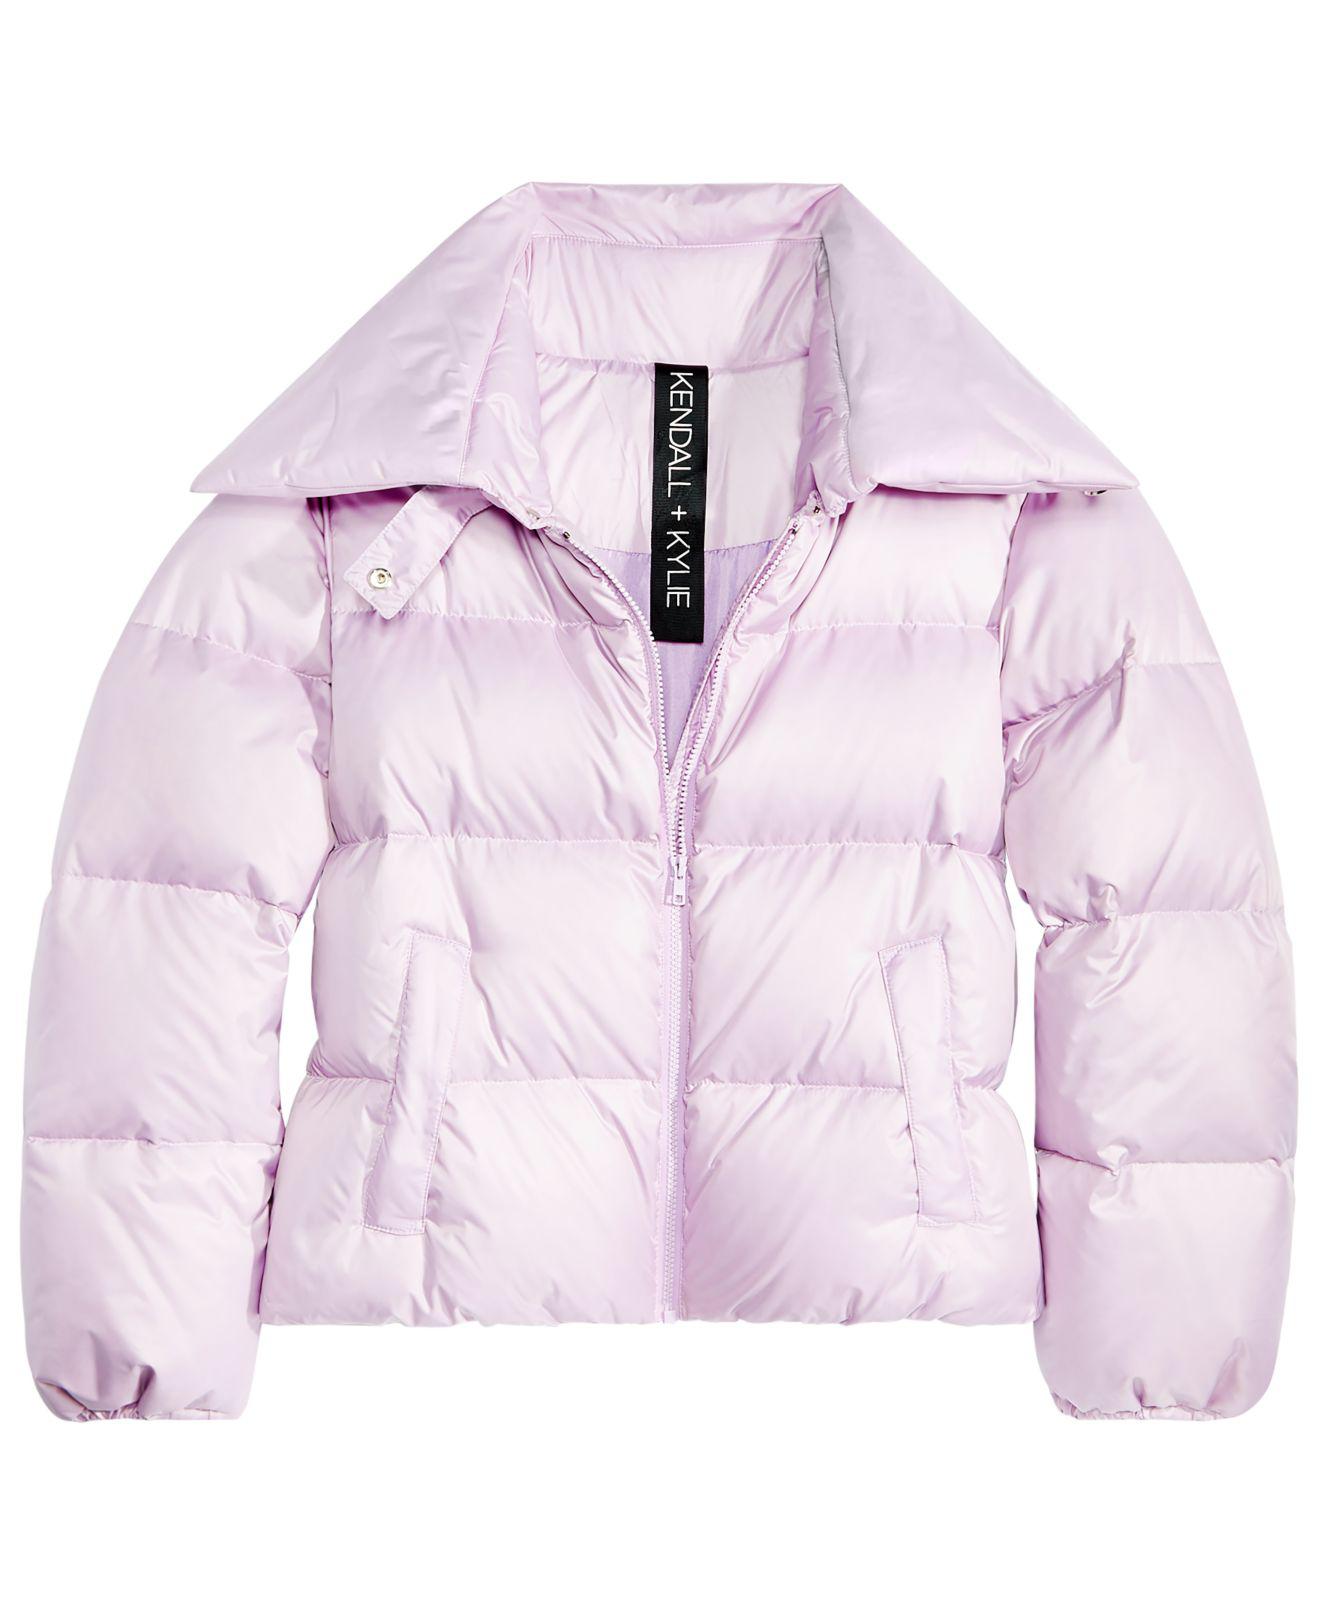 Kendall + Kylie Synthetic Cropped Puffer Coat in Lilac (Purple) - Lyst